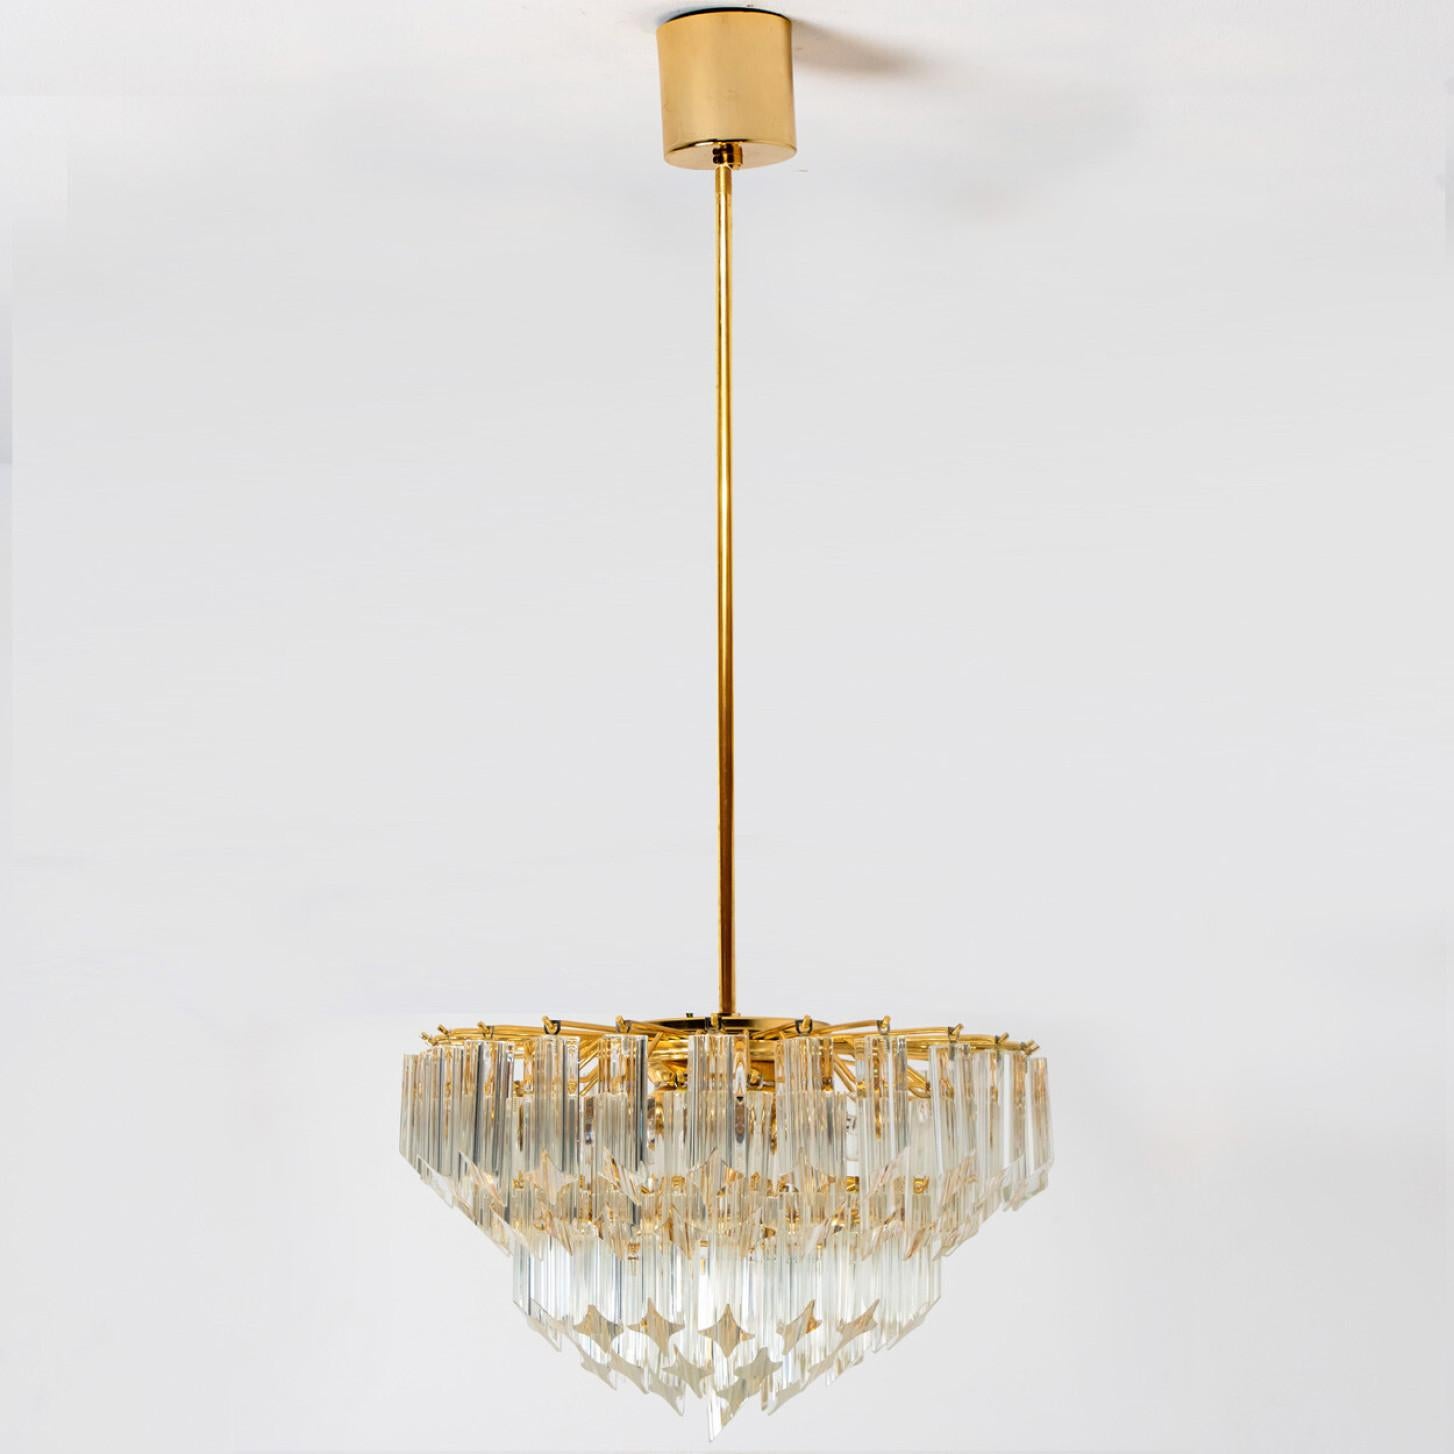 Beautiful chandelier featuring five tiers of multiple long crystal clear glass 